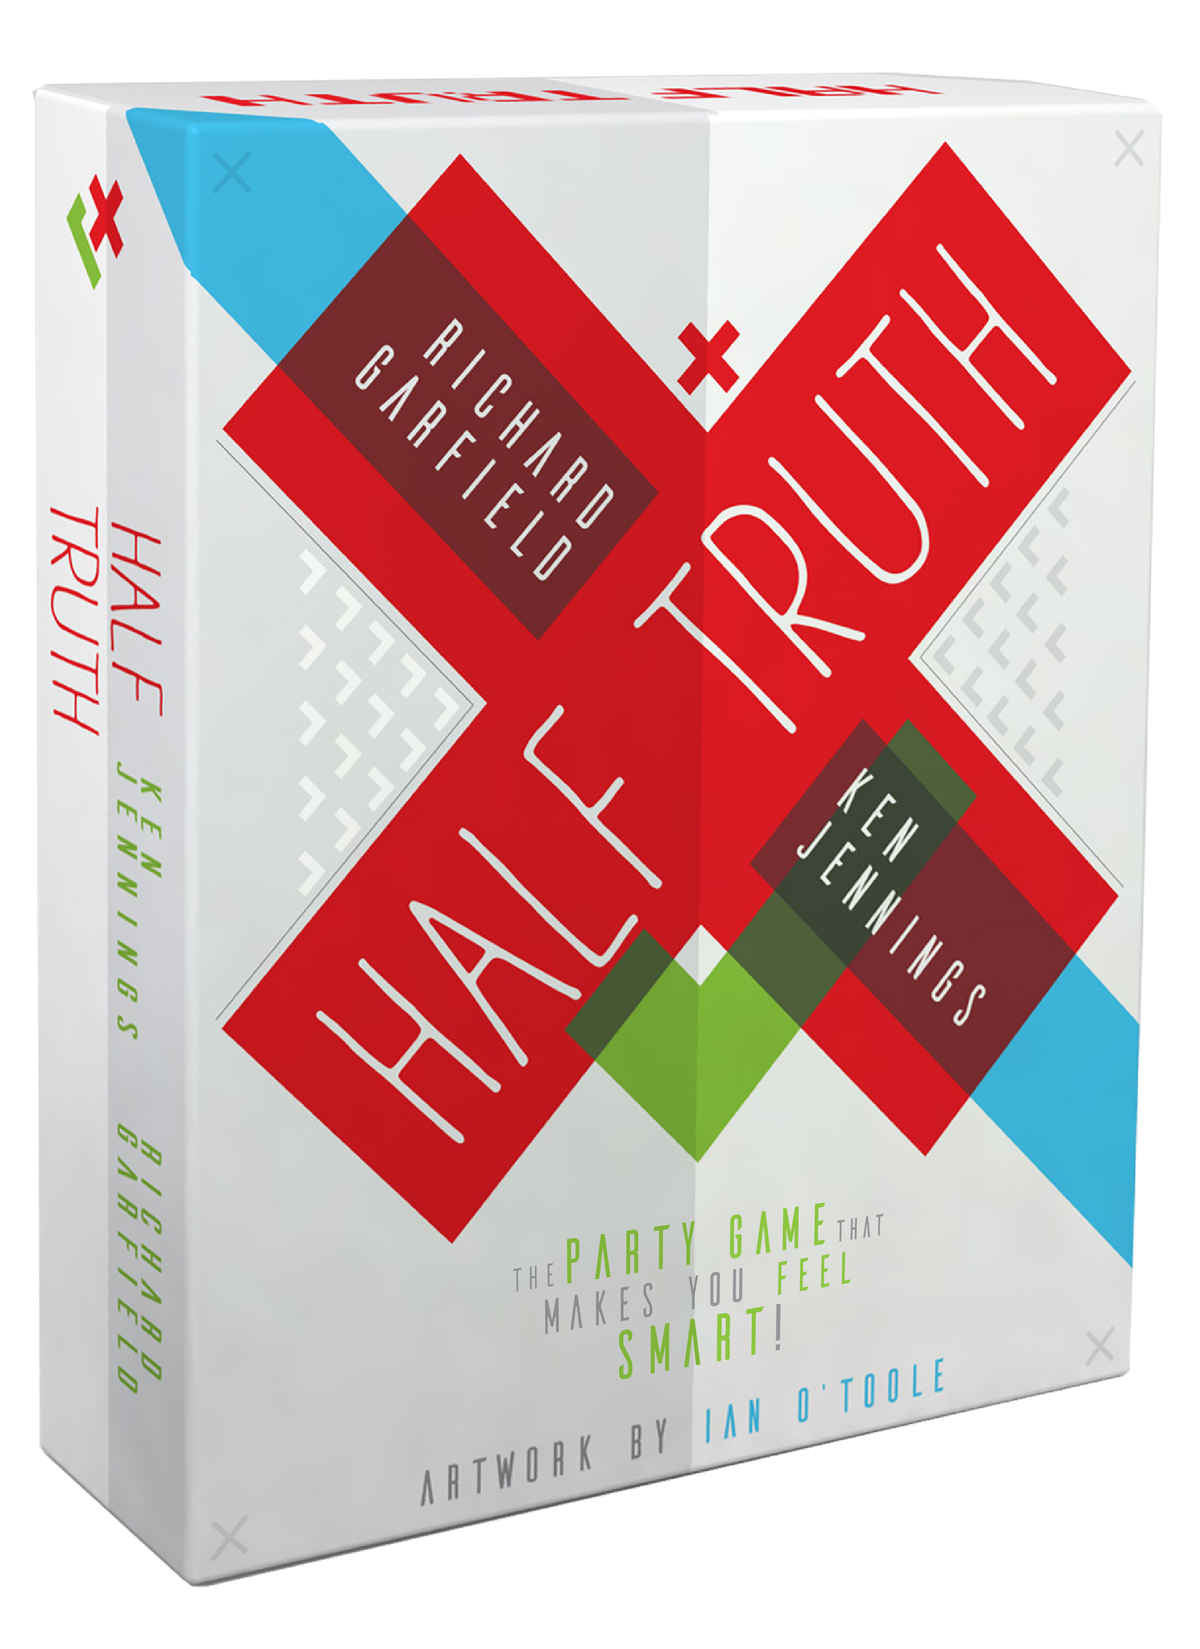 Half Truth - the box art for Half Truth, which shows a red crossroads on a white box.